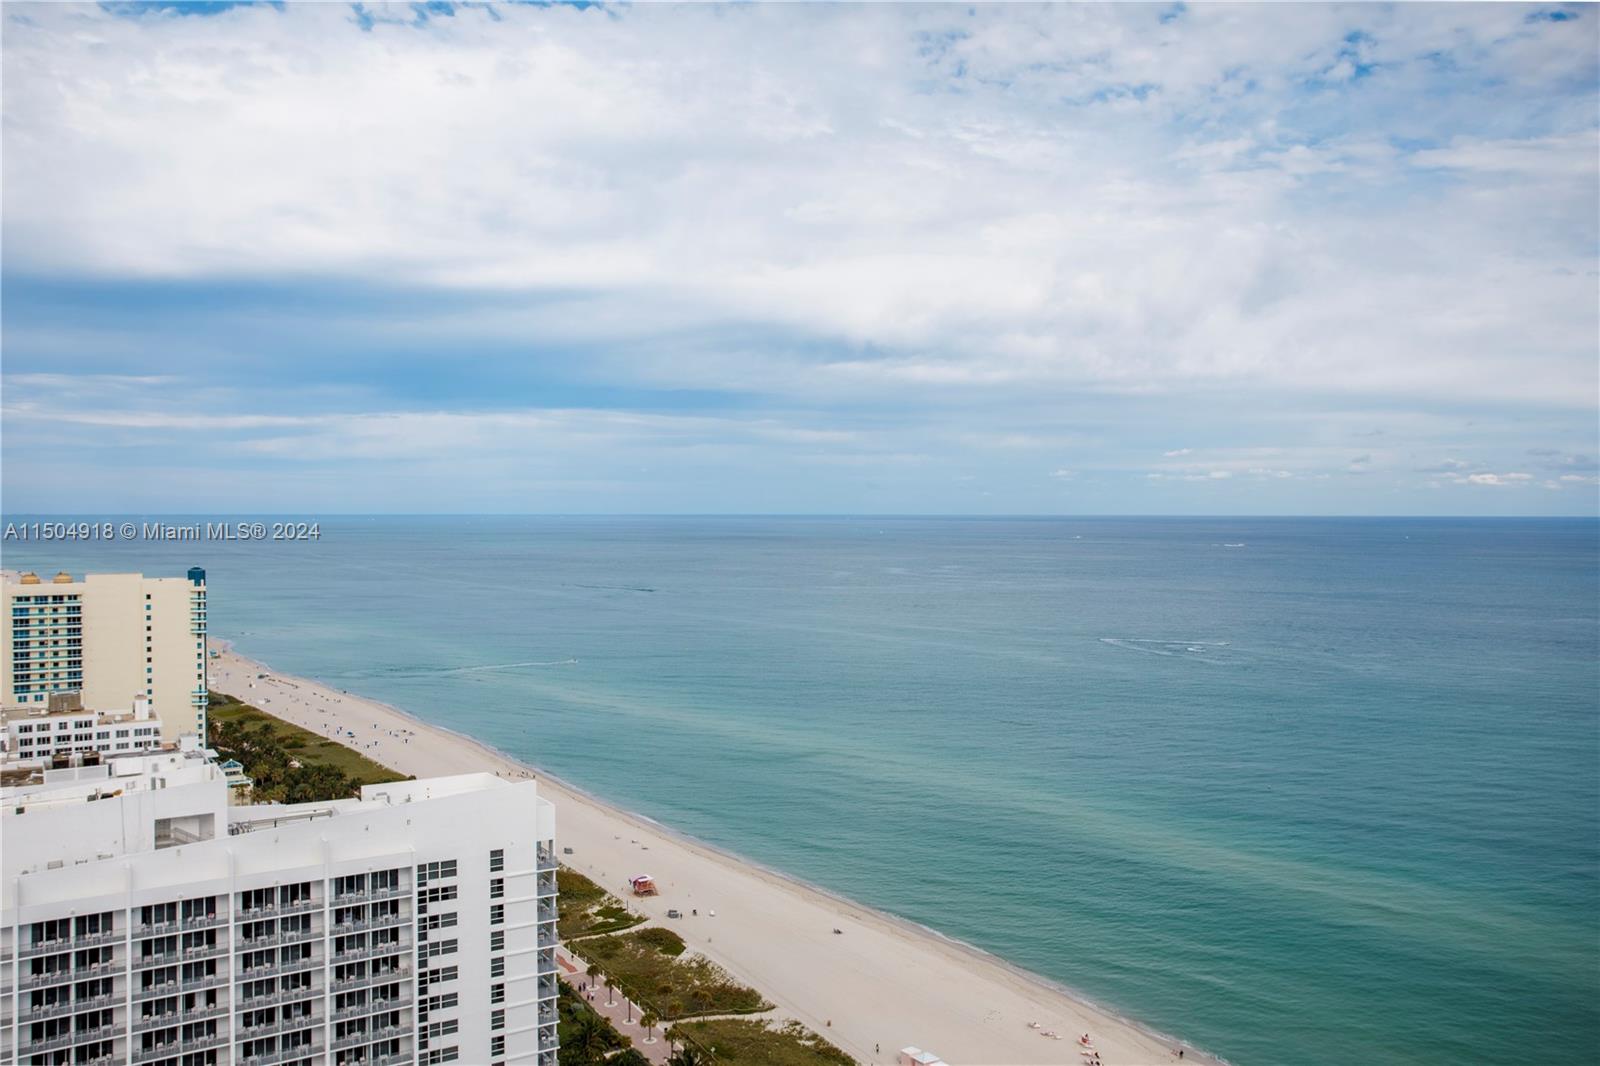 This high floor unit has spectacular unobstructed views of the ocean, the bay and Miami's skyline, with floor to ceiling glass doors from living room & kitchen, all connected through an oversized terrace. New refrigerator and dishwasher. Large master bedroom with walking closet and master bath with jacuzzi and separate shower. Large second bedroom with big closet and access to bathroom. The Blue & Green Diamond are one of the most prestigious buildings in Miami Beach with an amazing location just minutes away from all Miami attractions and Airport. First class amenities : gated community, concierge, valet parking, 24 hr security, pool, tennis courts, beach towel service, oceanfront gym/ clubhouse, spa, business center, restaurant and more. FURNISHED OR UNFURNISHED. VERY EASY TO SHOW